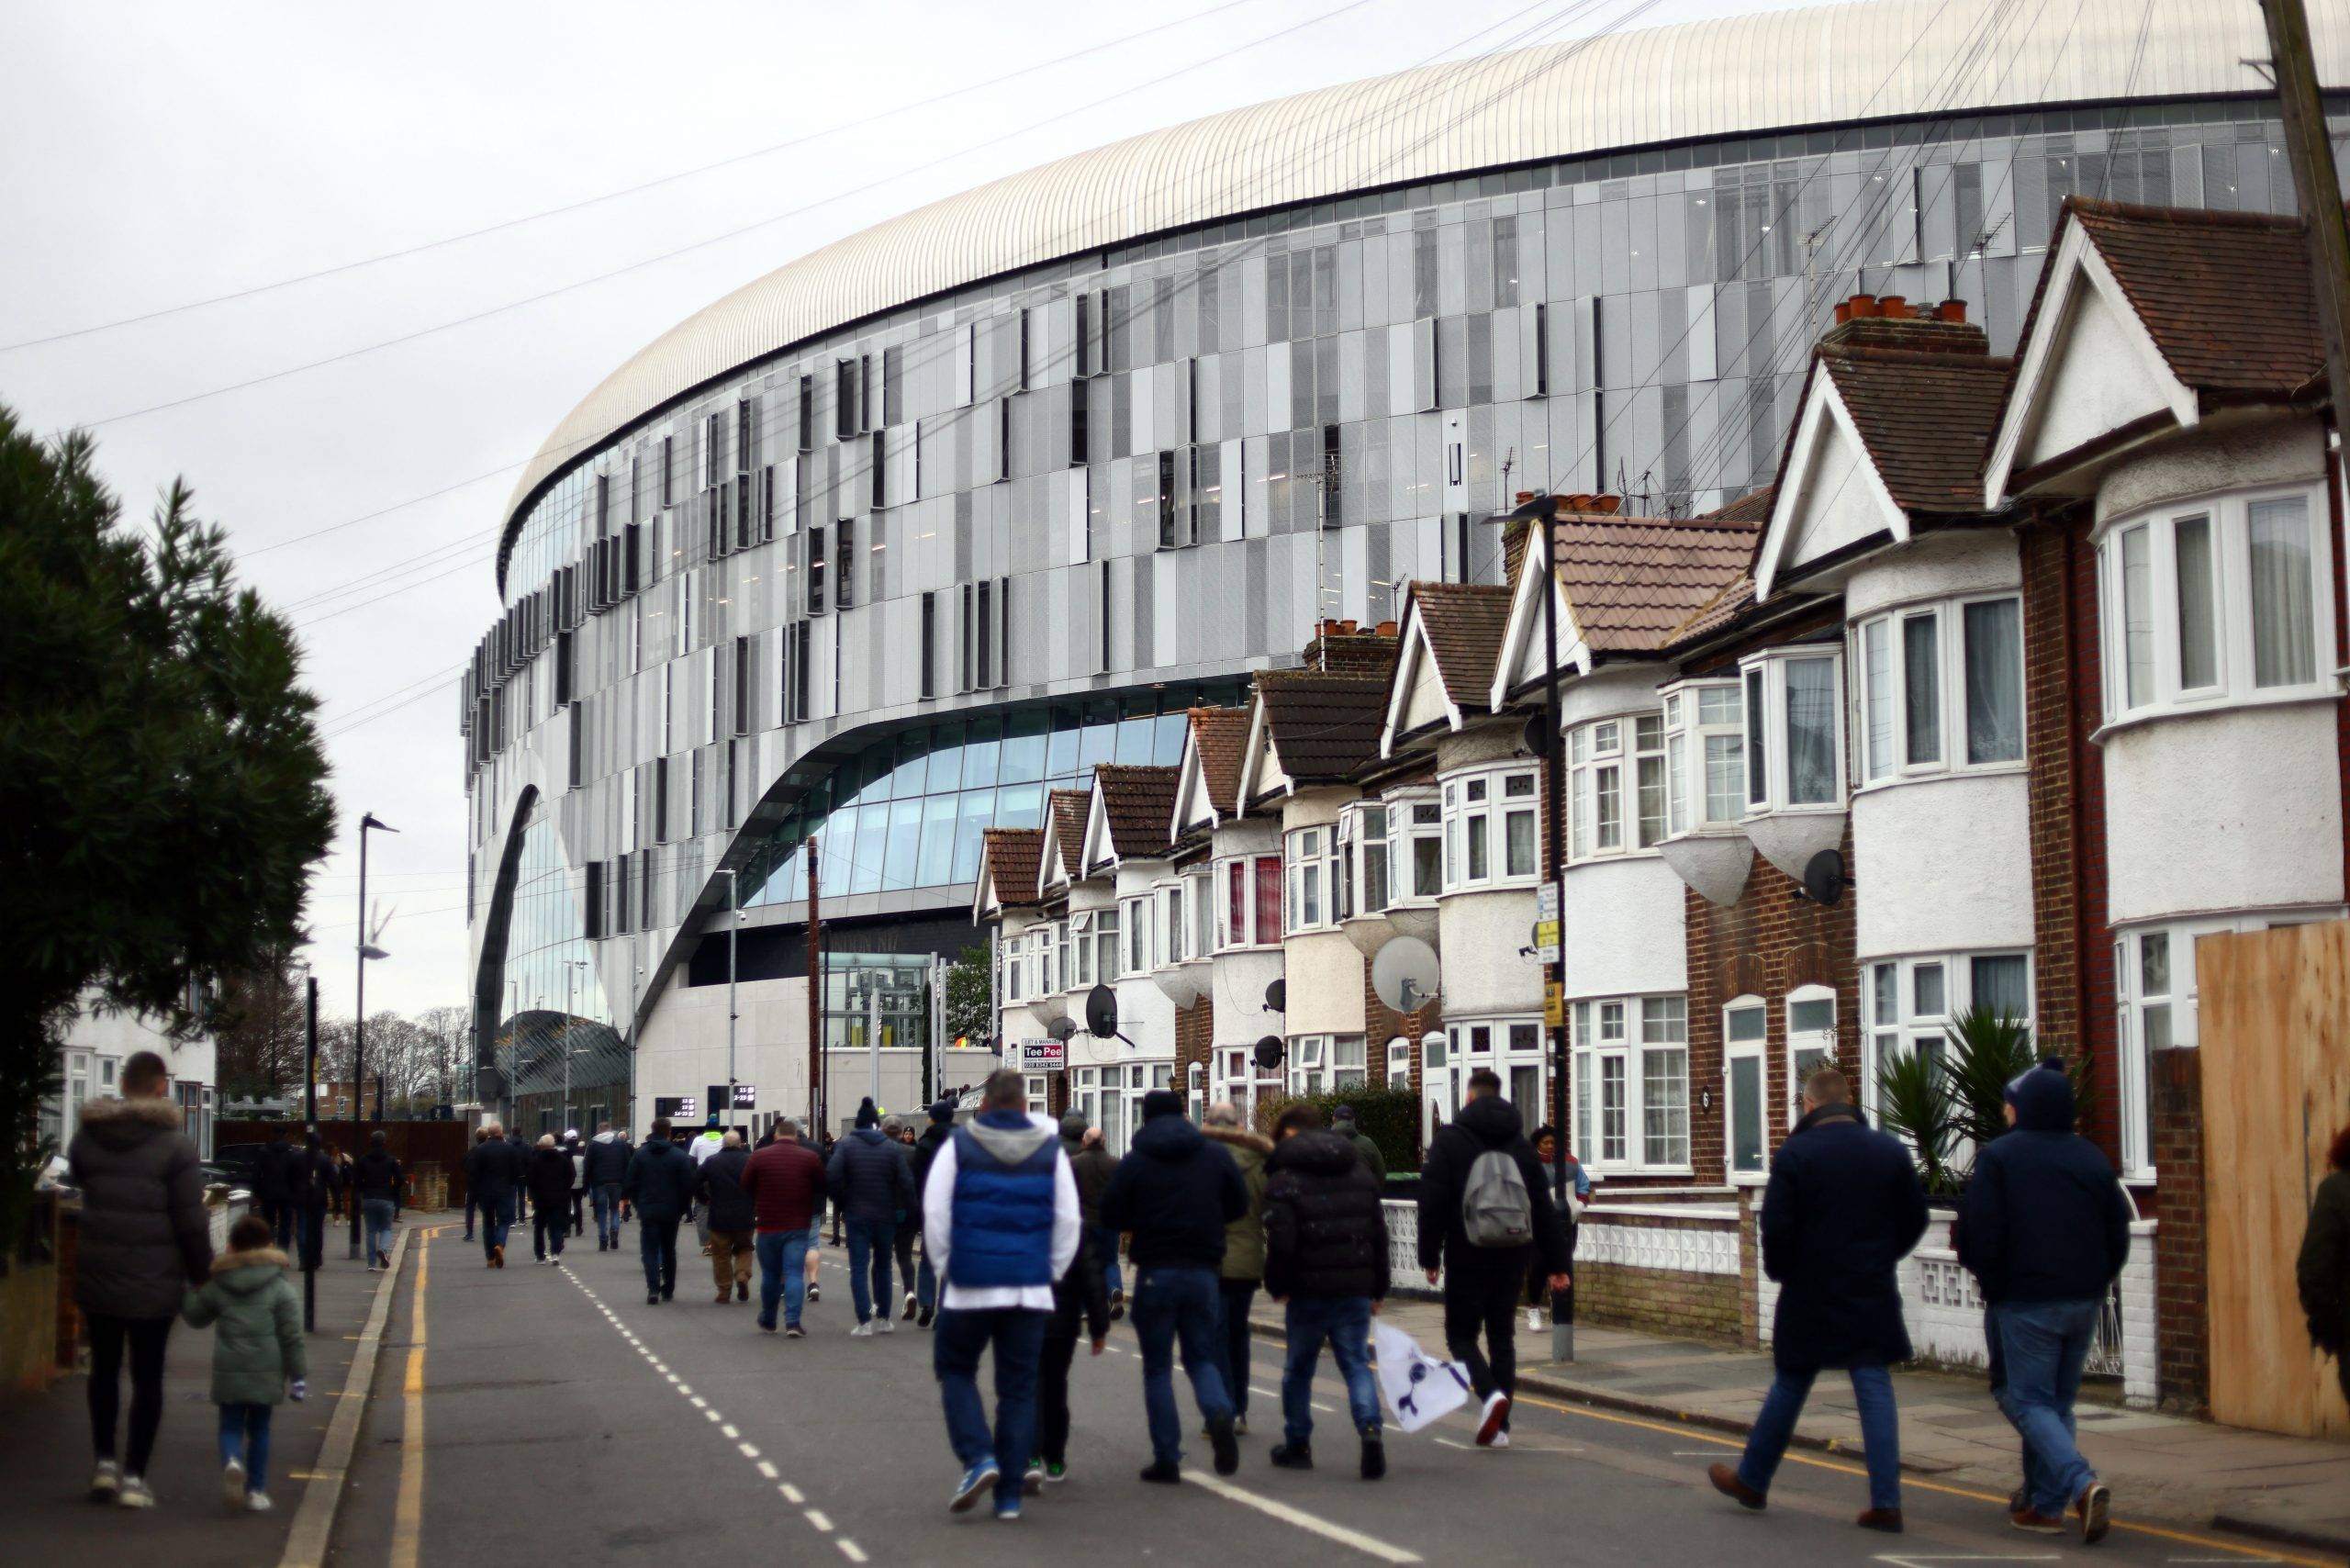 Spurs stadium naming rights value could 'increase' after twist - Premier League News